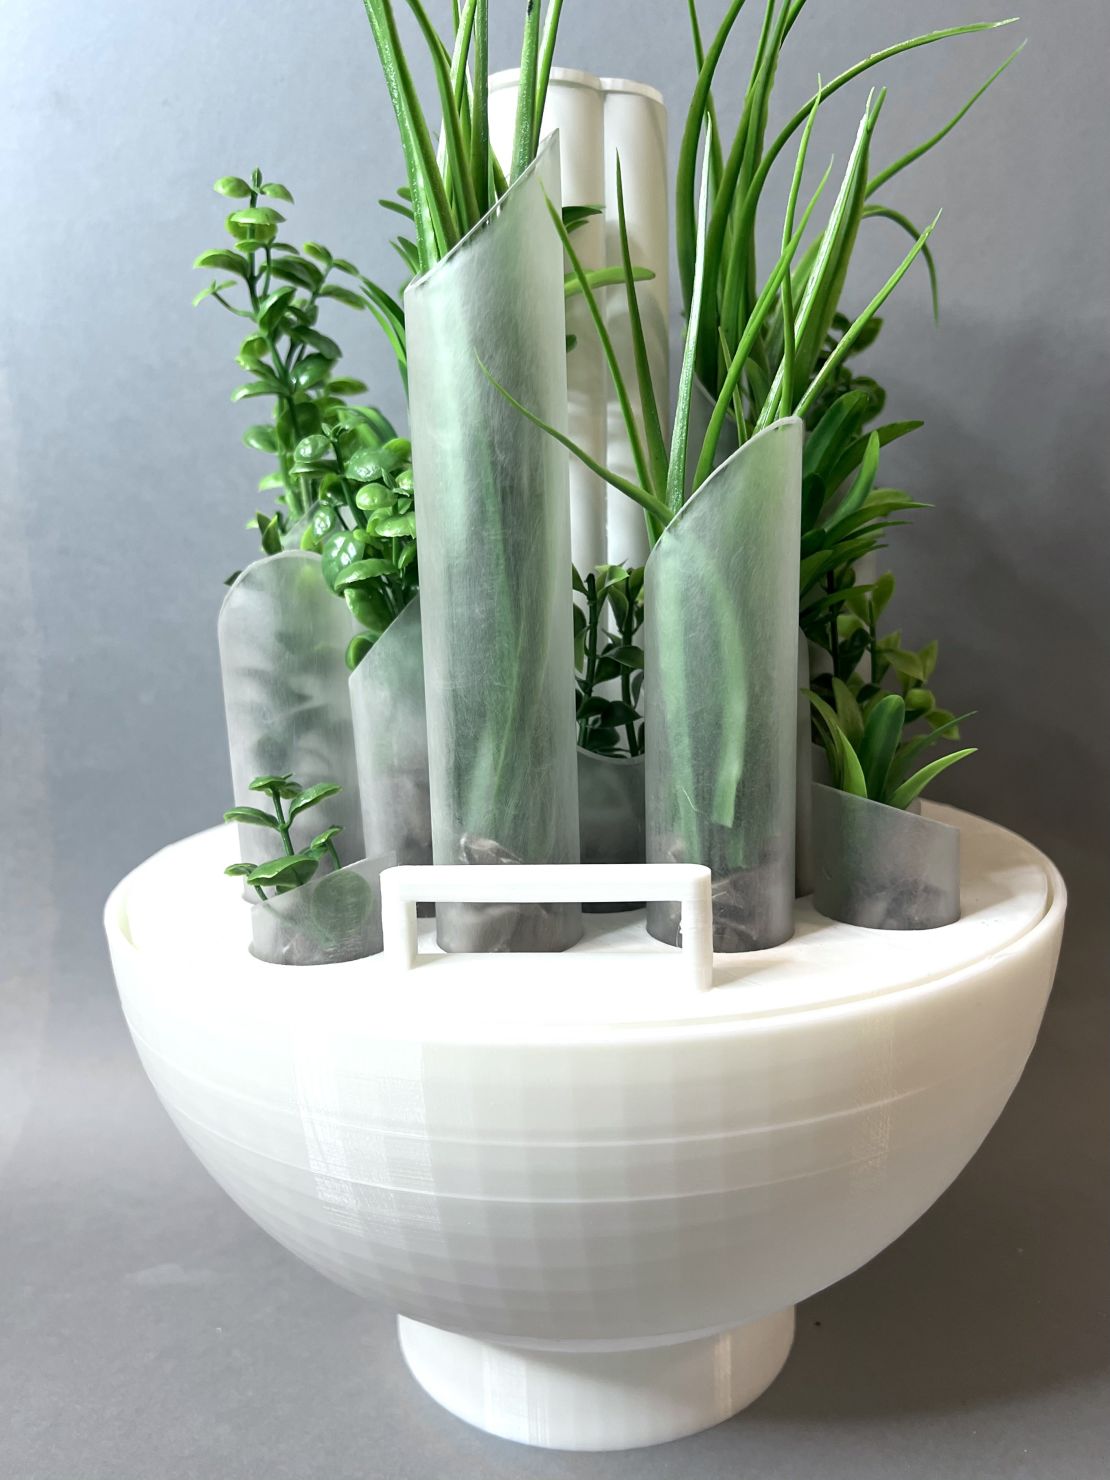 "Wastology" is a two-in-one composter and plant grower designed for indoor use.